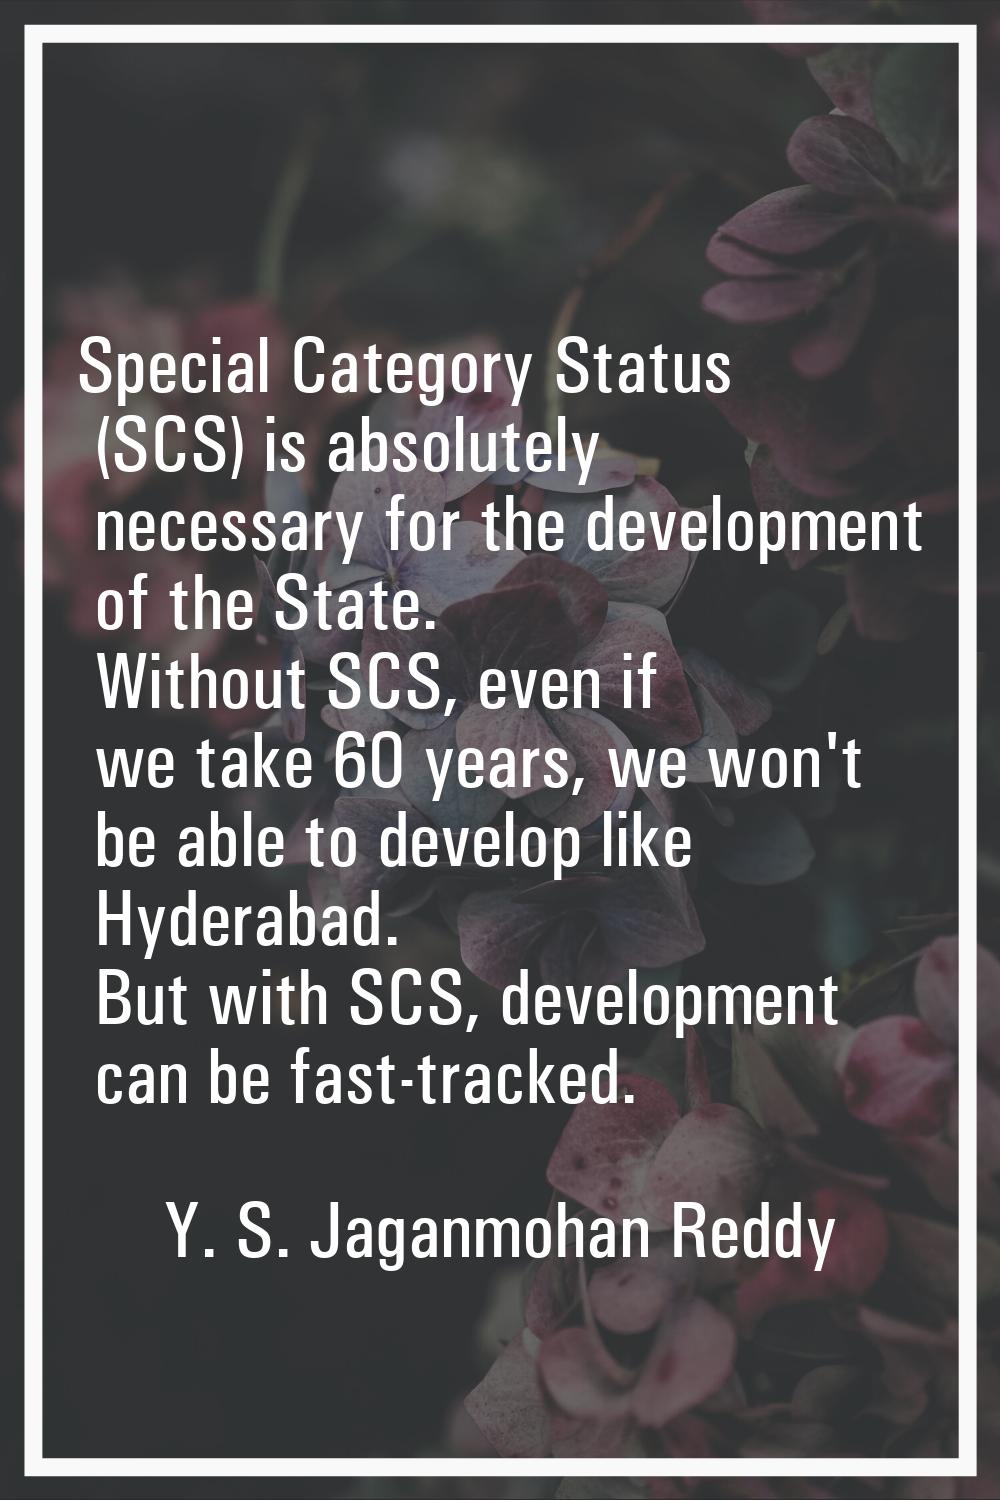 Special Category Status (SCS) is absolutely necessary for the development of the State. Without SCS